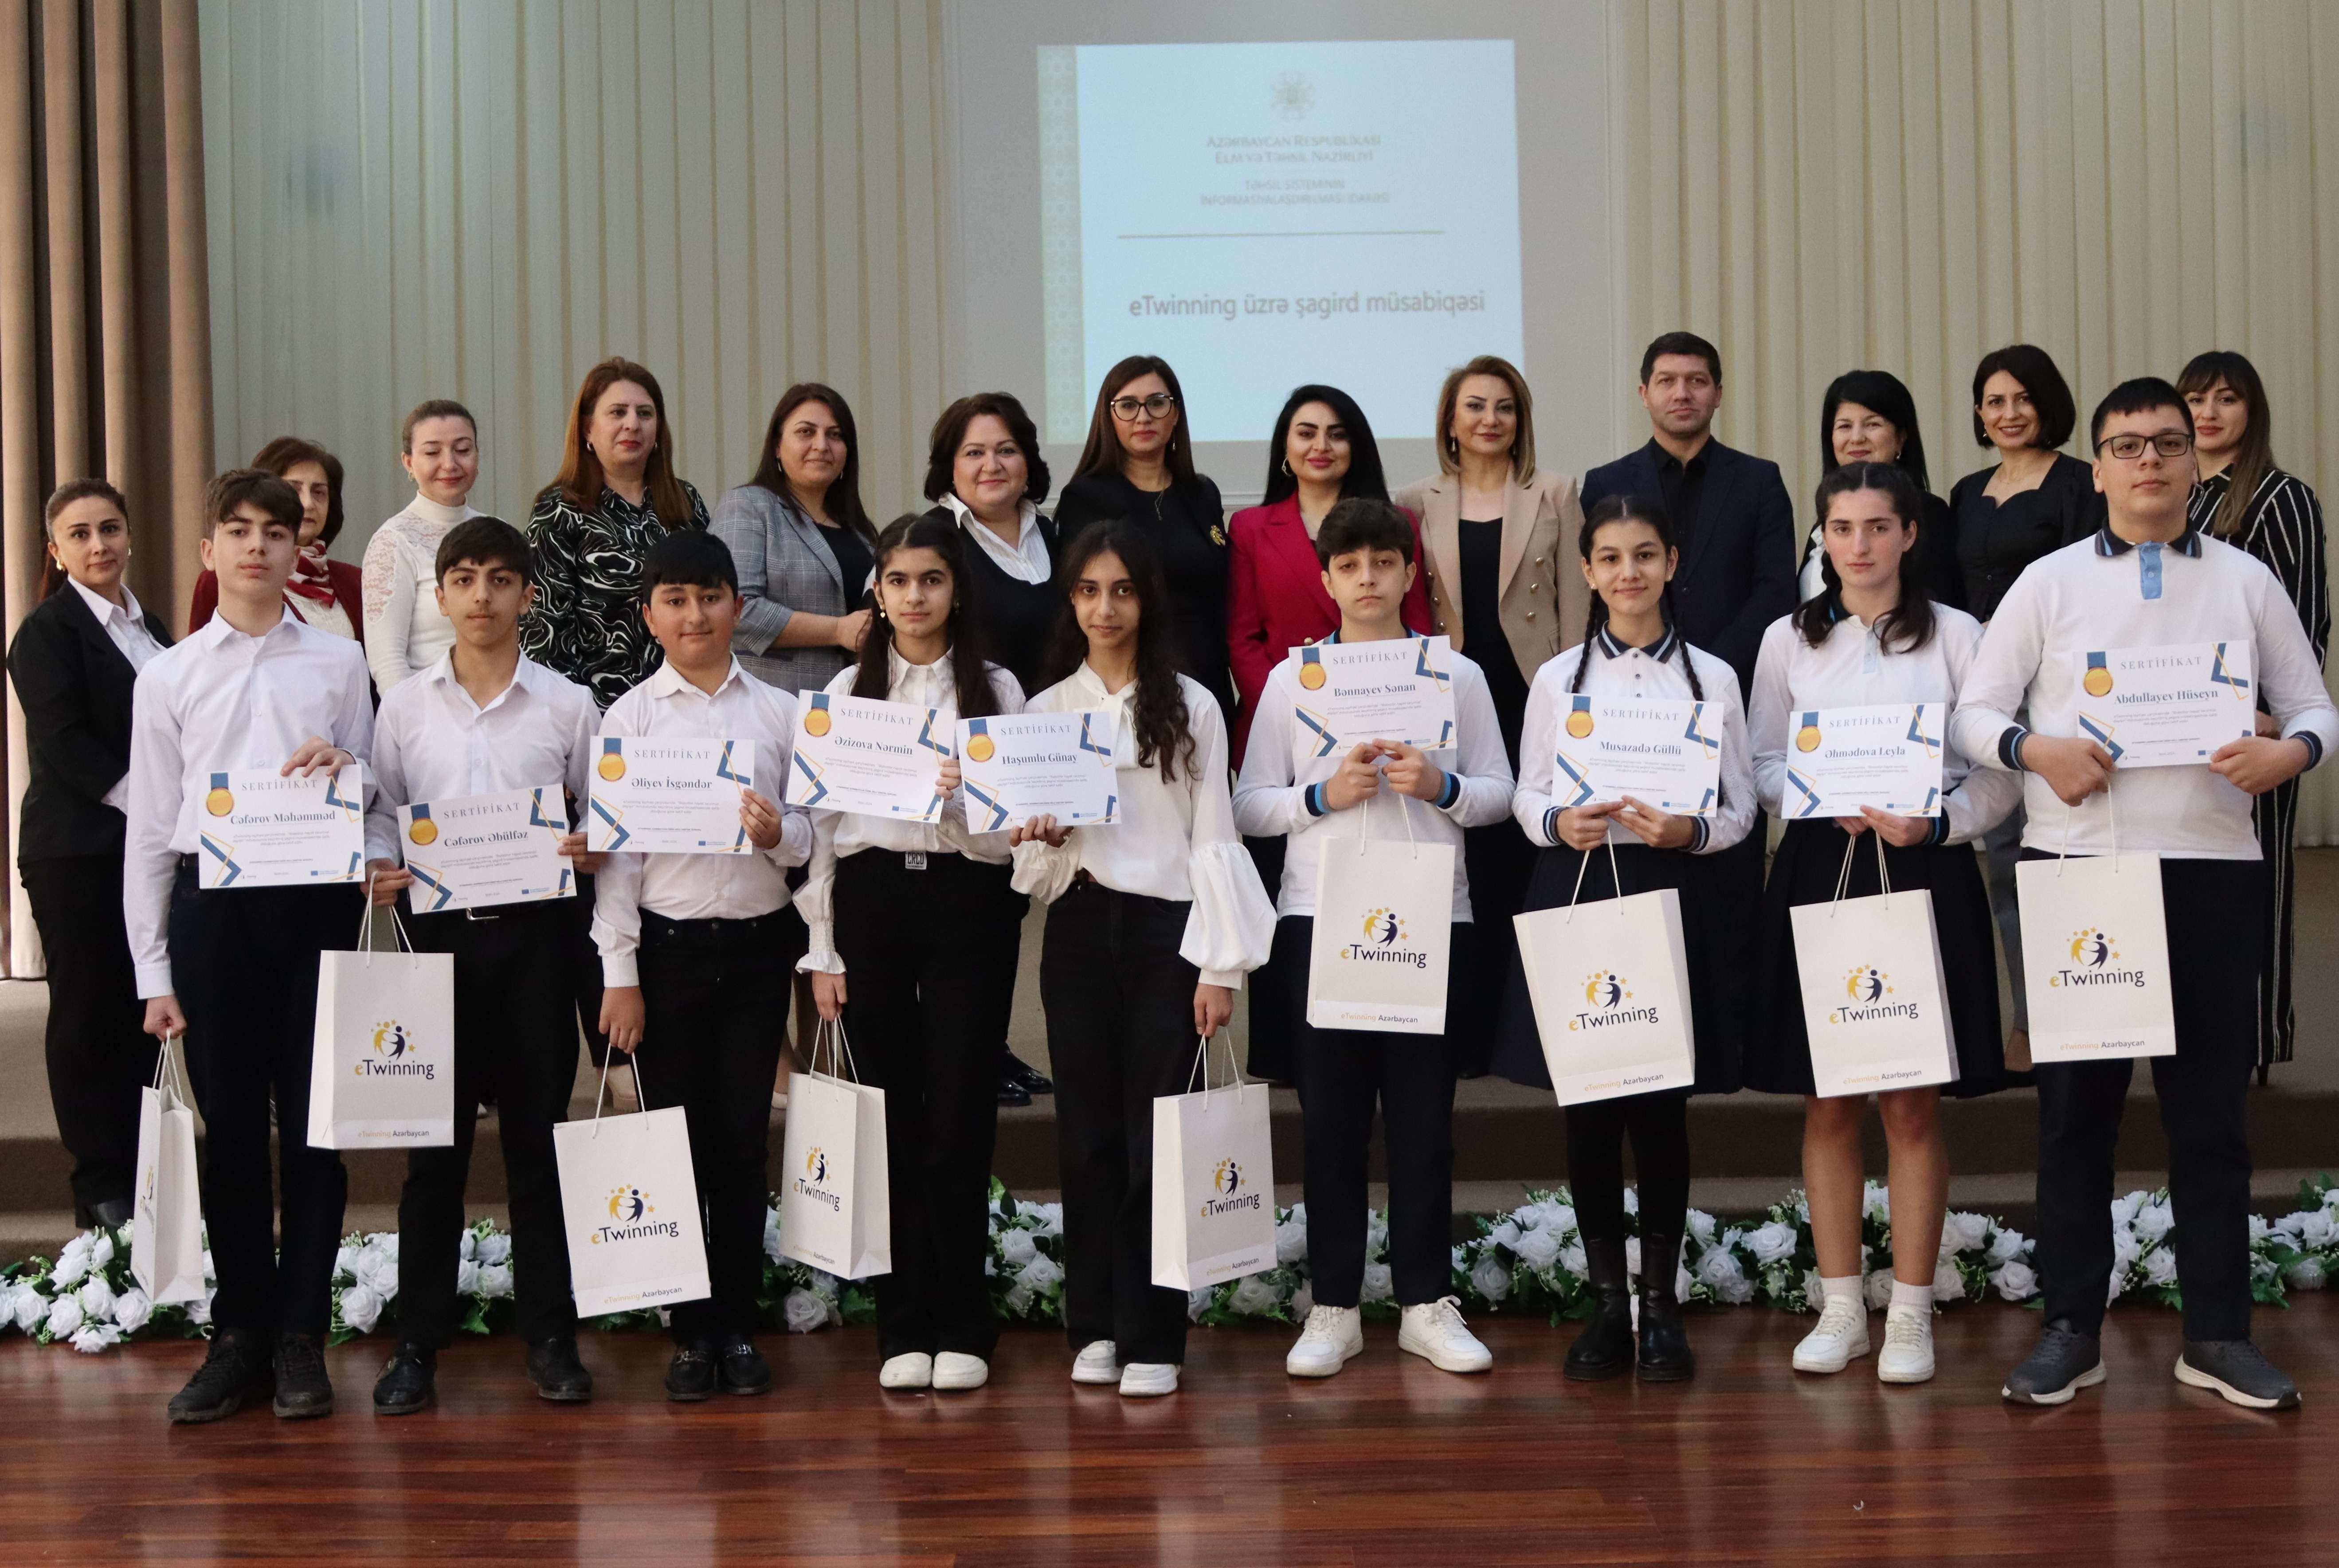 The debate stage of the student competition on eTwinning was held